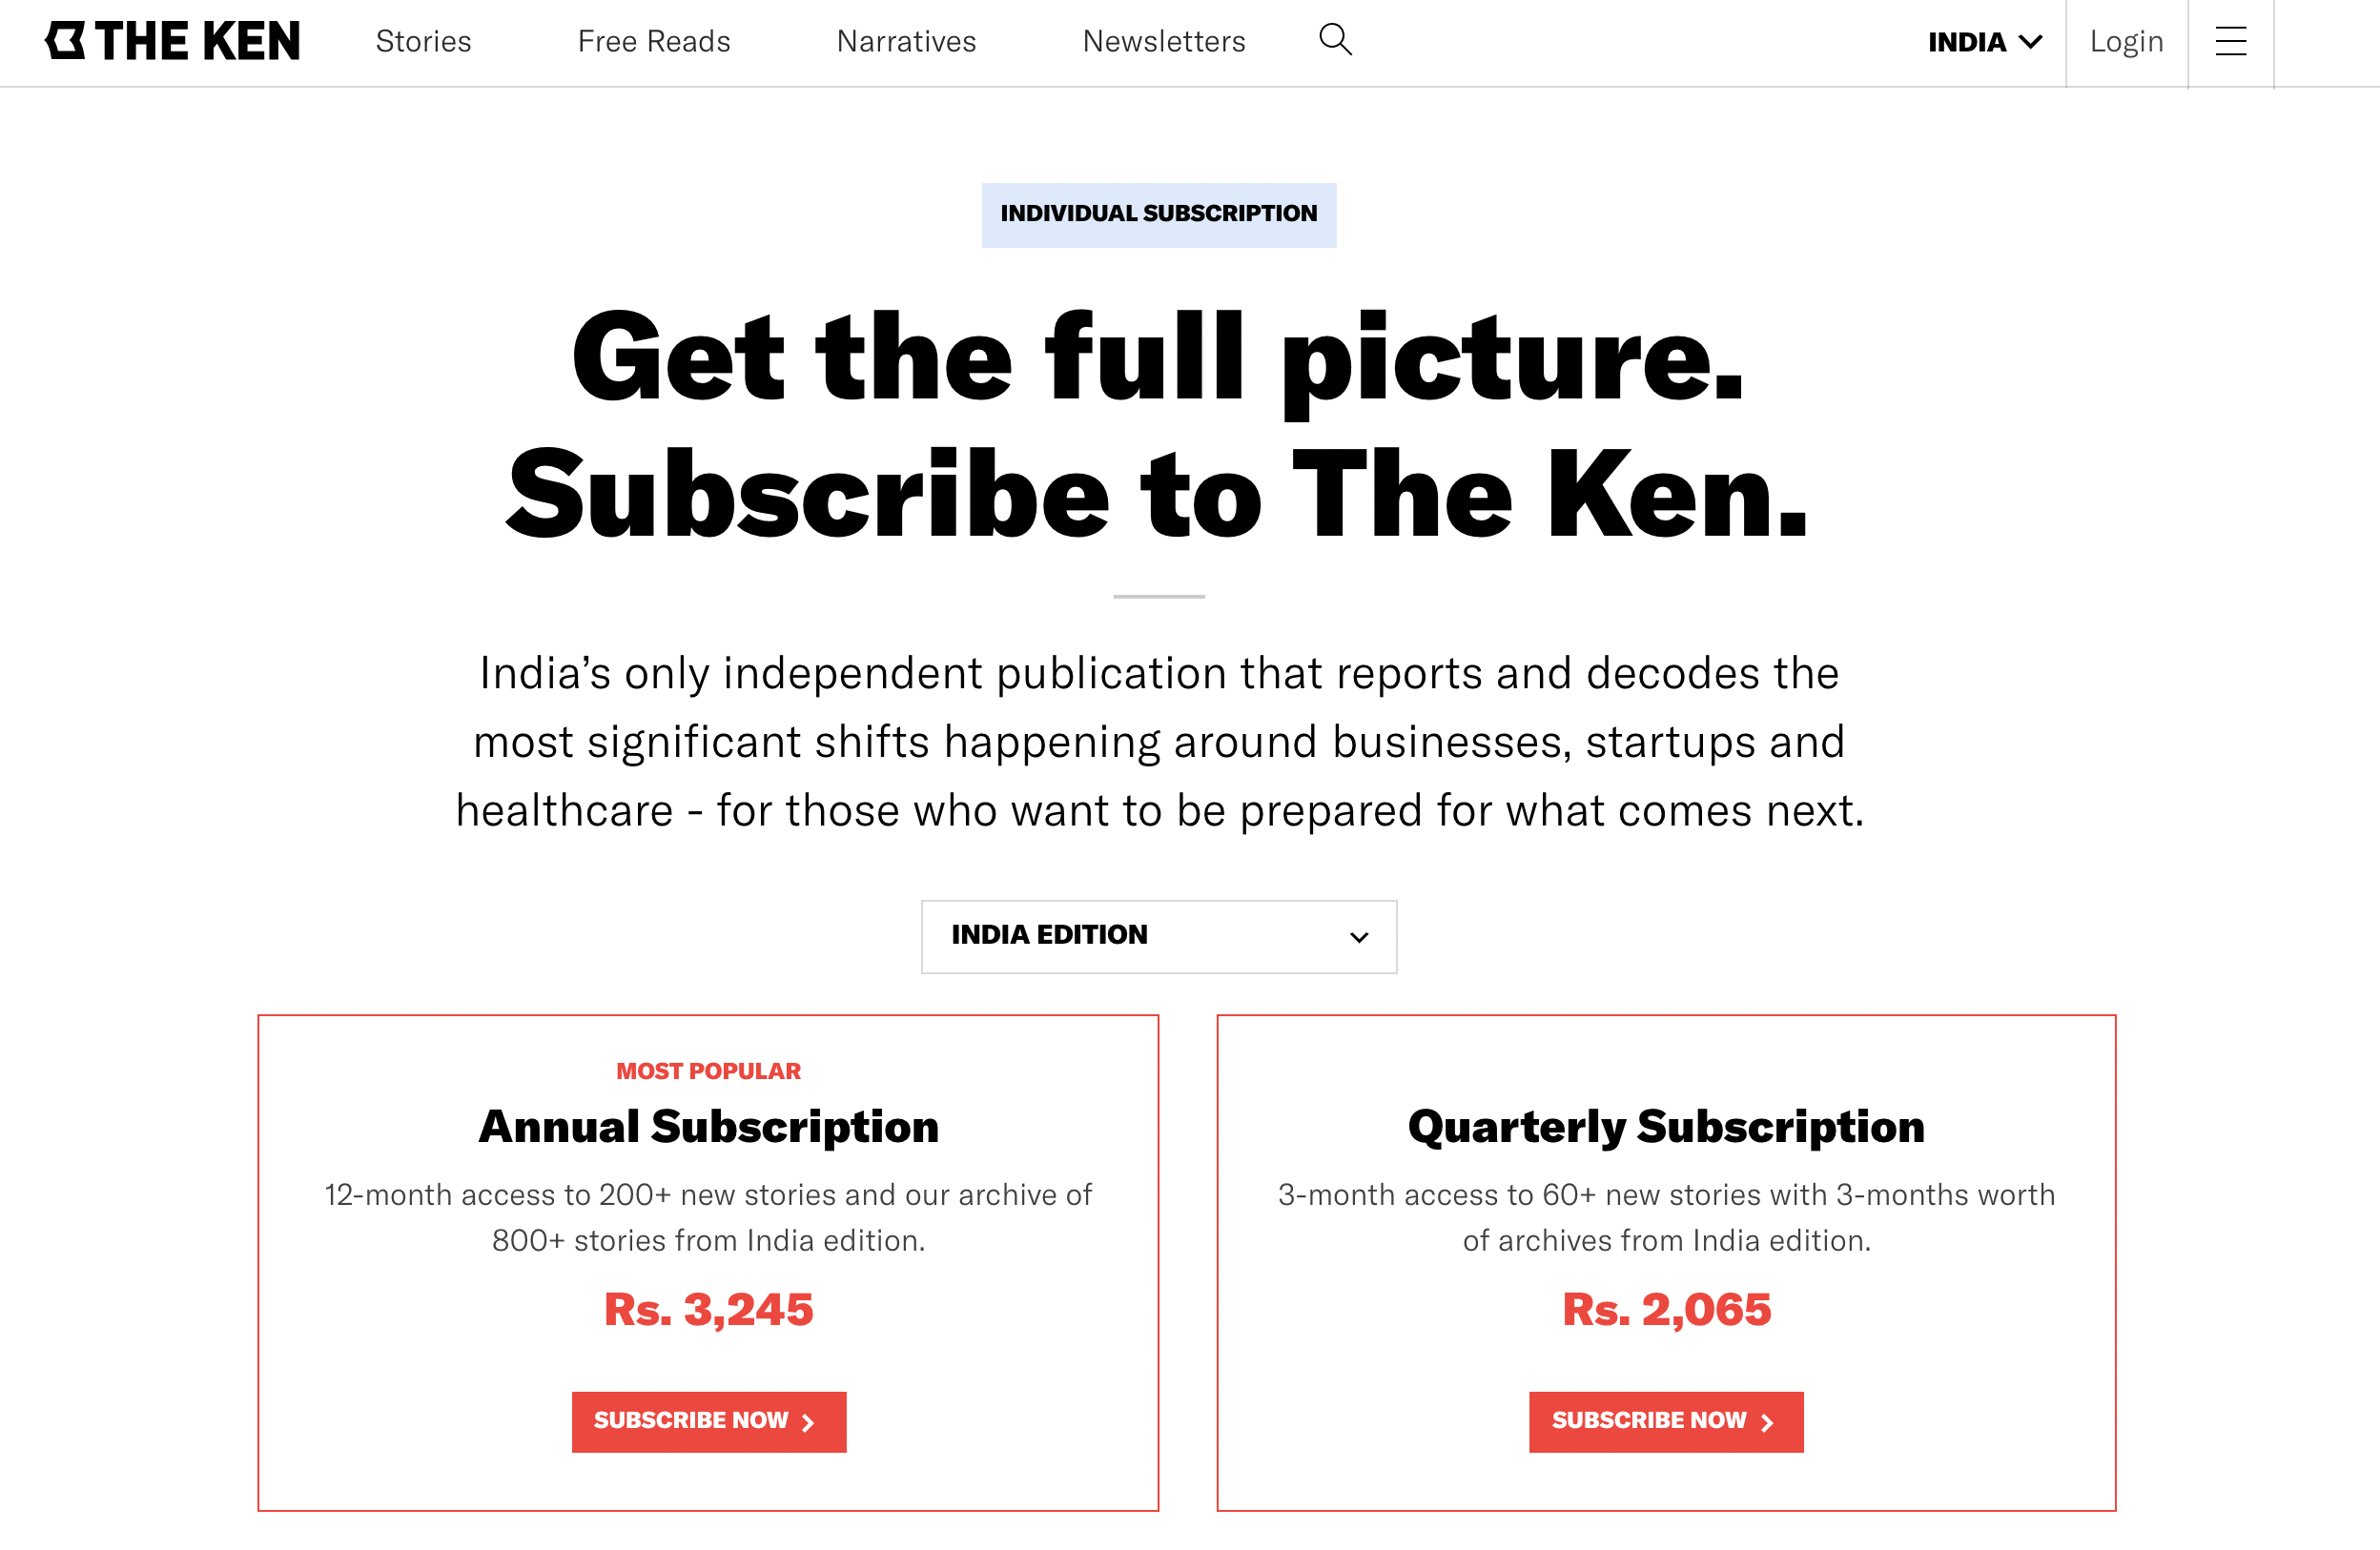 The Ken on demand delivery subscription business model